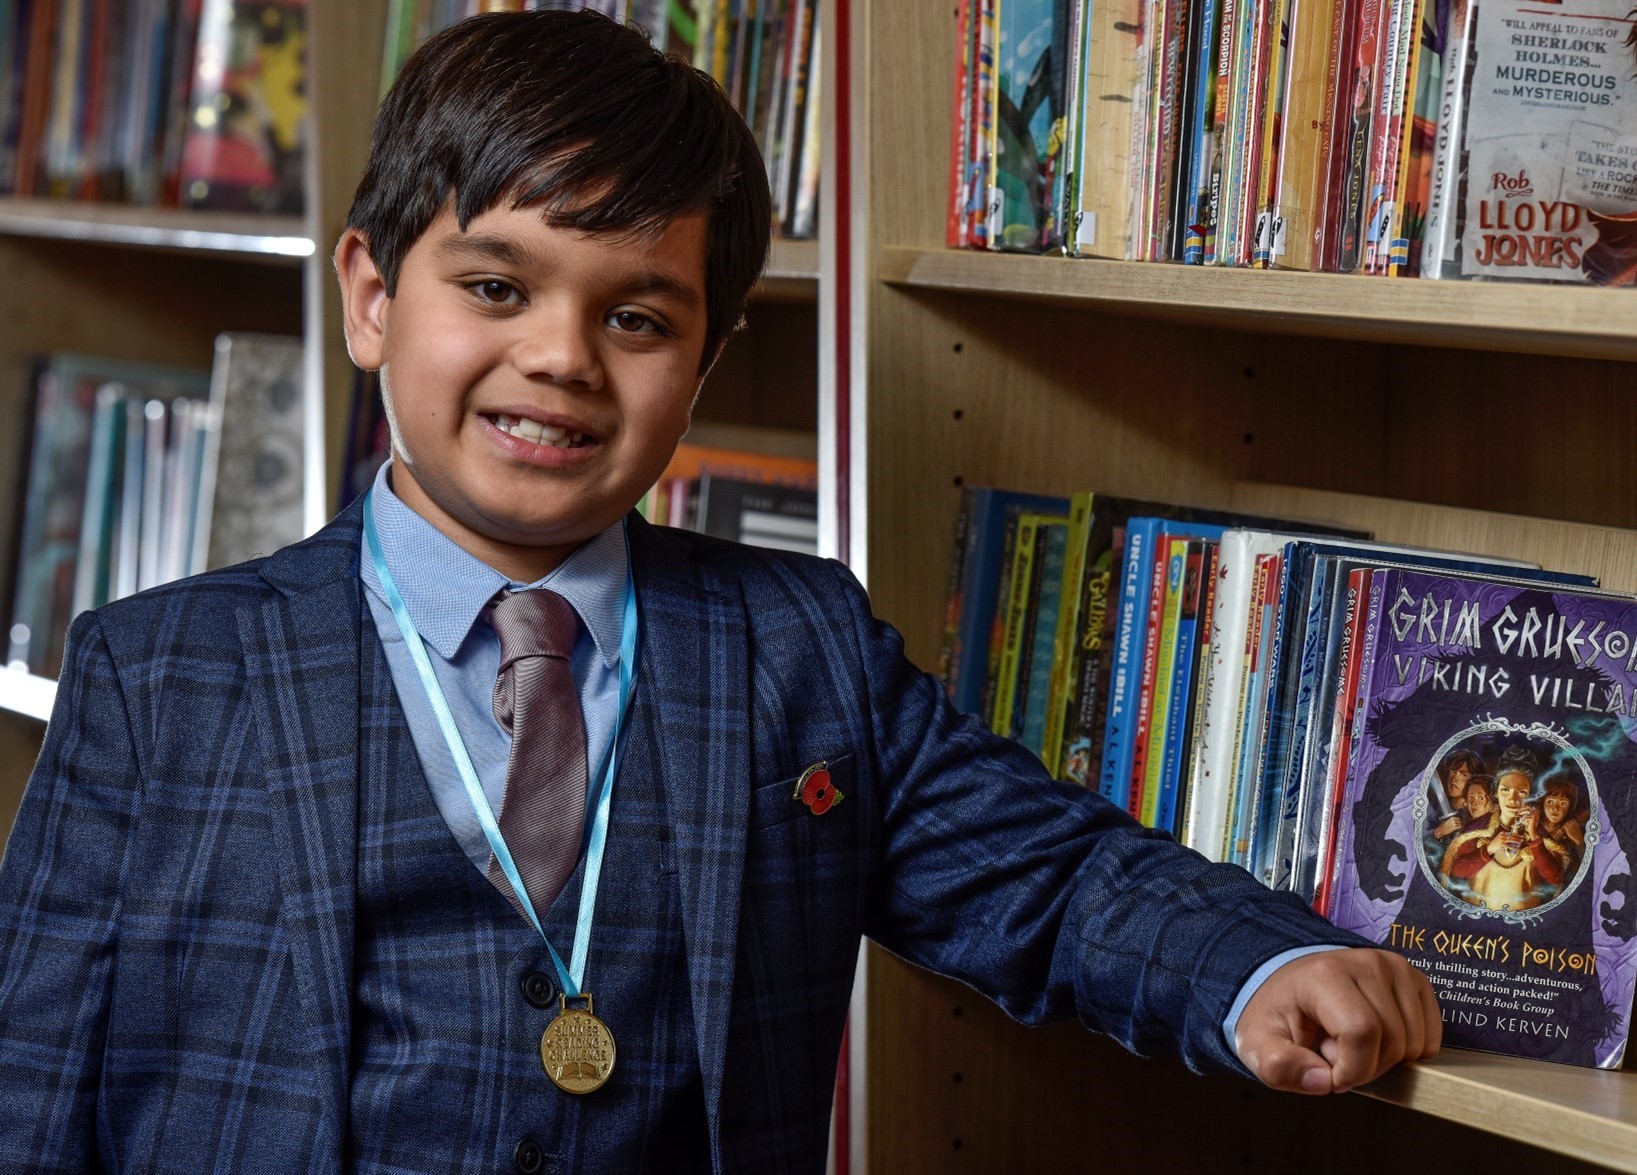 Eight-year-old Milan Kumar made national headlines earlier this year after reading 50 books in just three months earning him praise from The Duchess of Cornwall among many others.